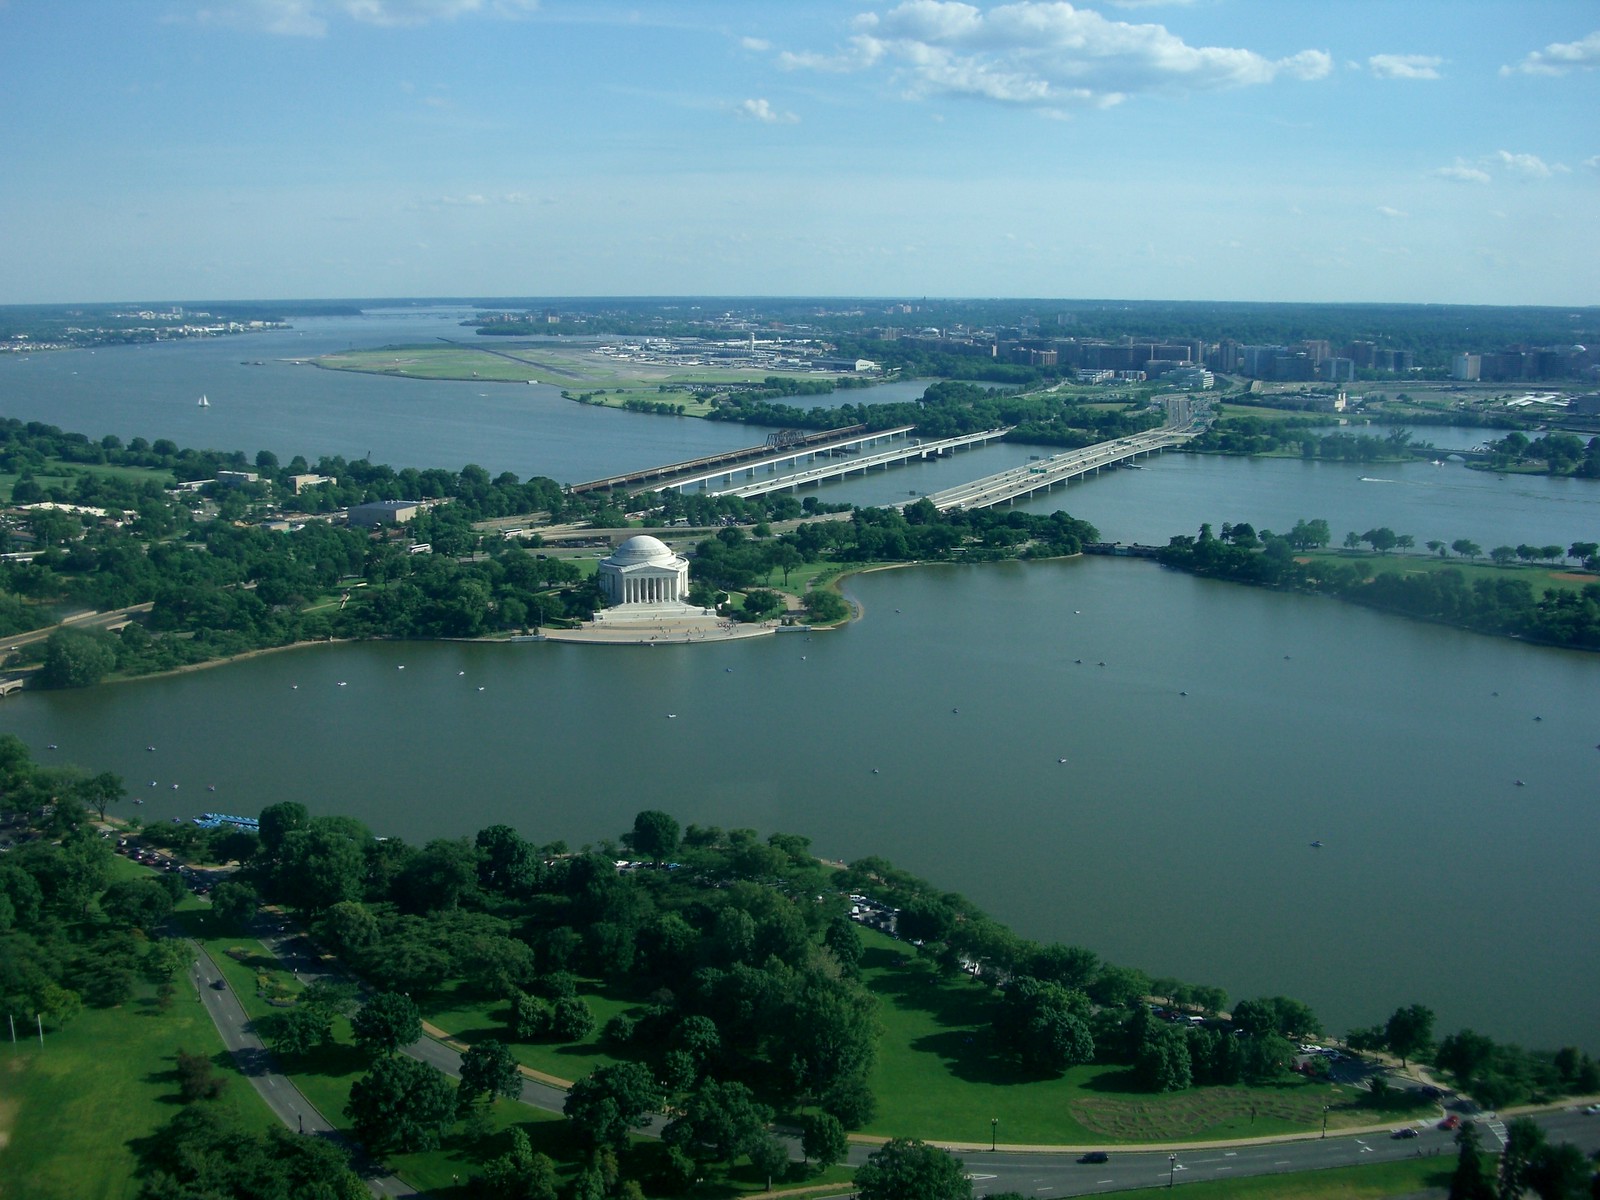 Jefferson Monument from the top of the Washington Monument